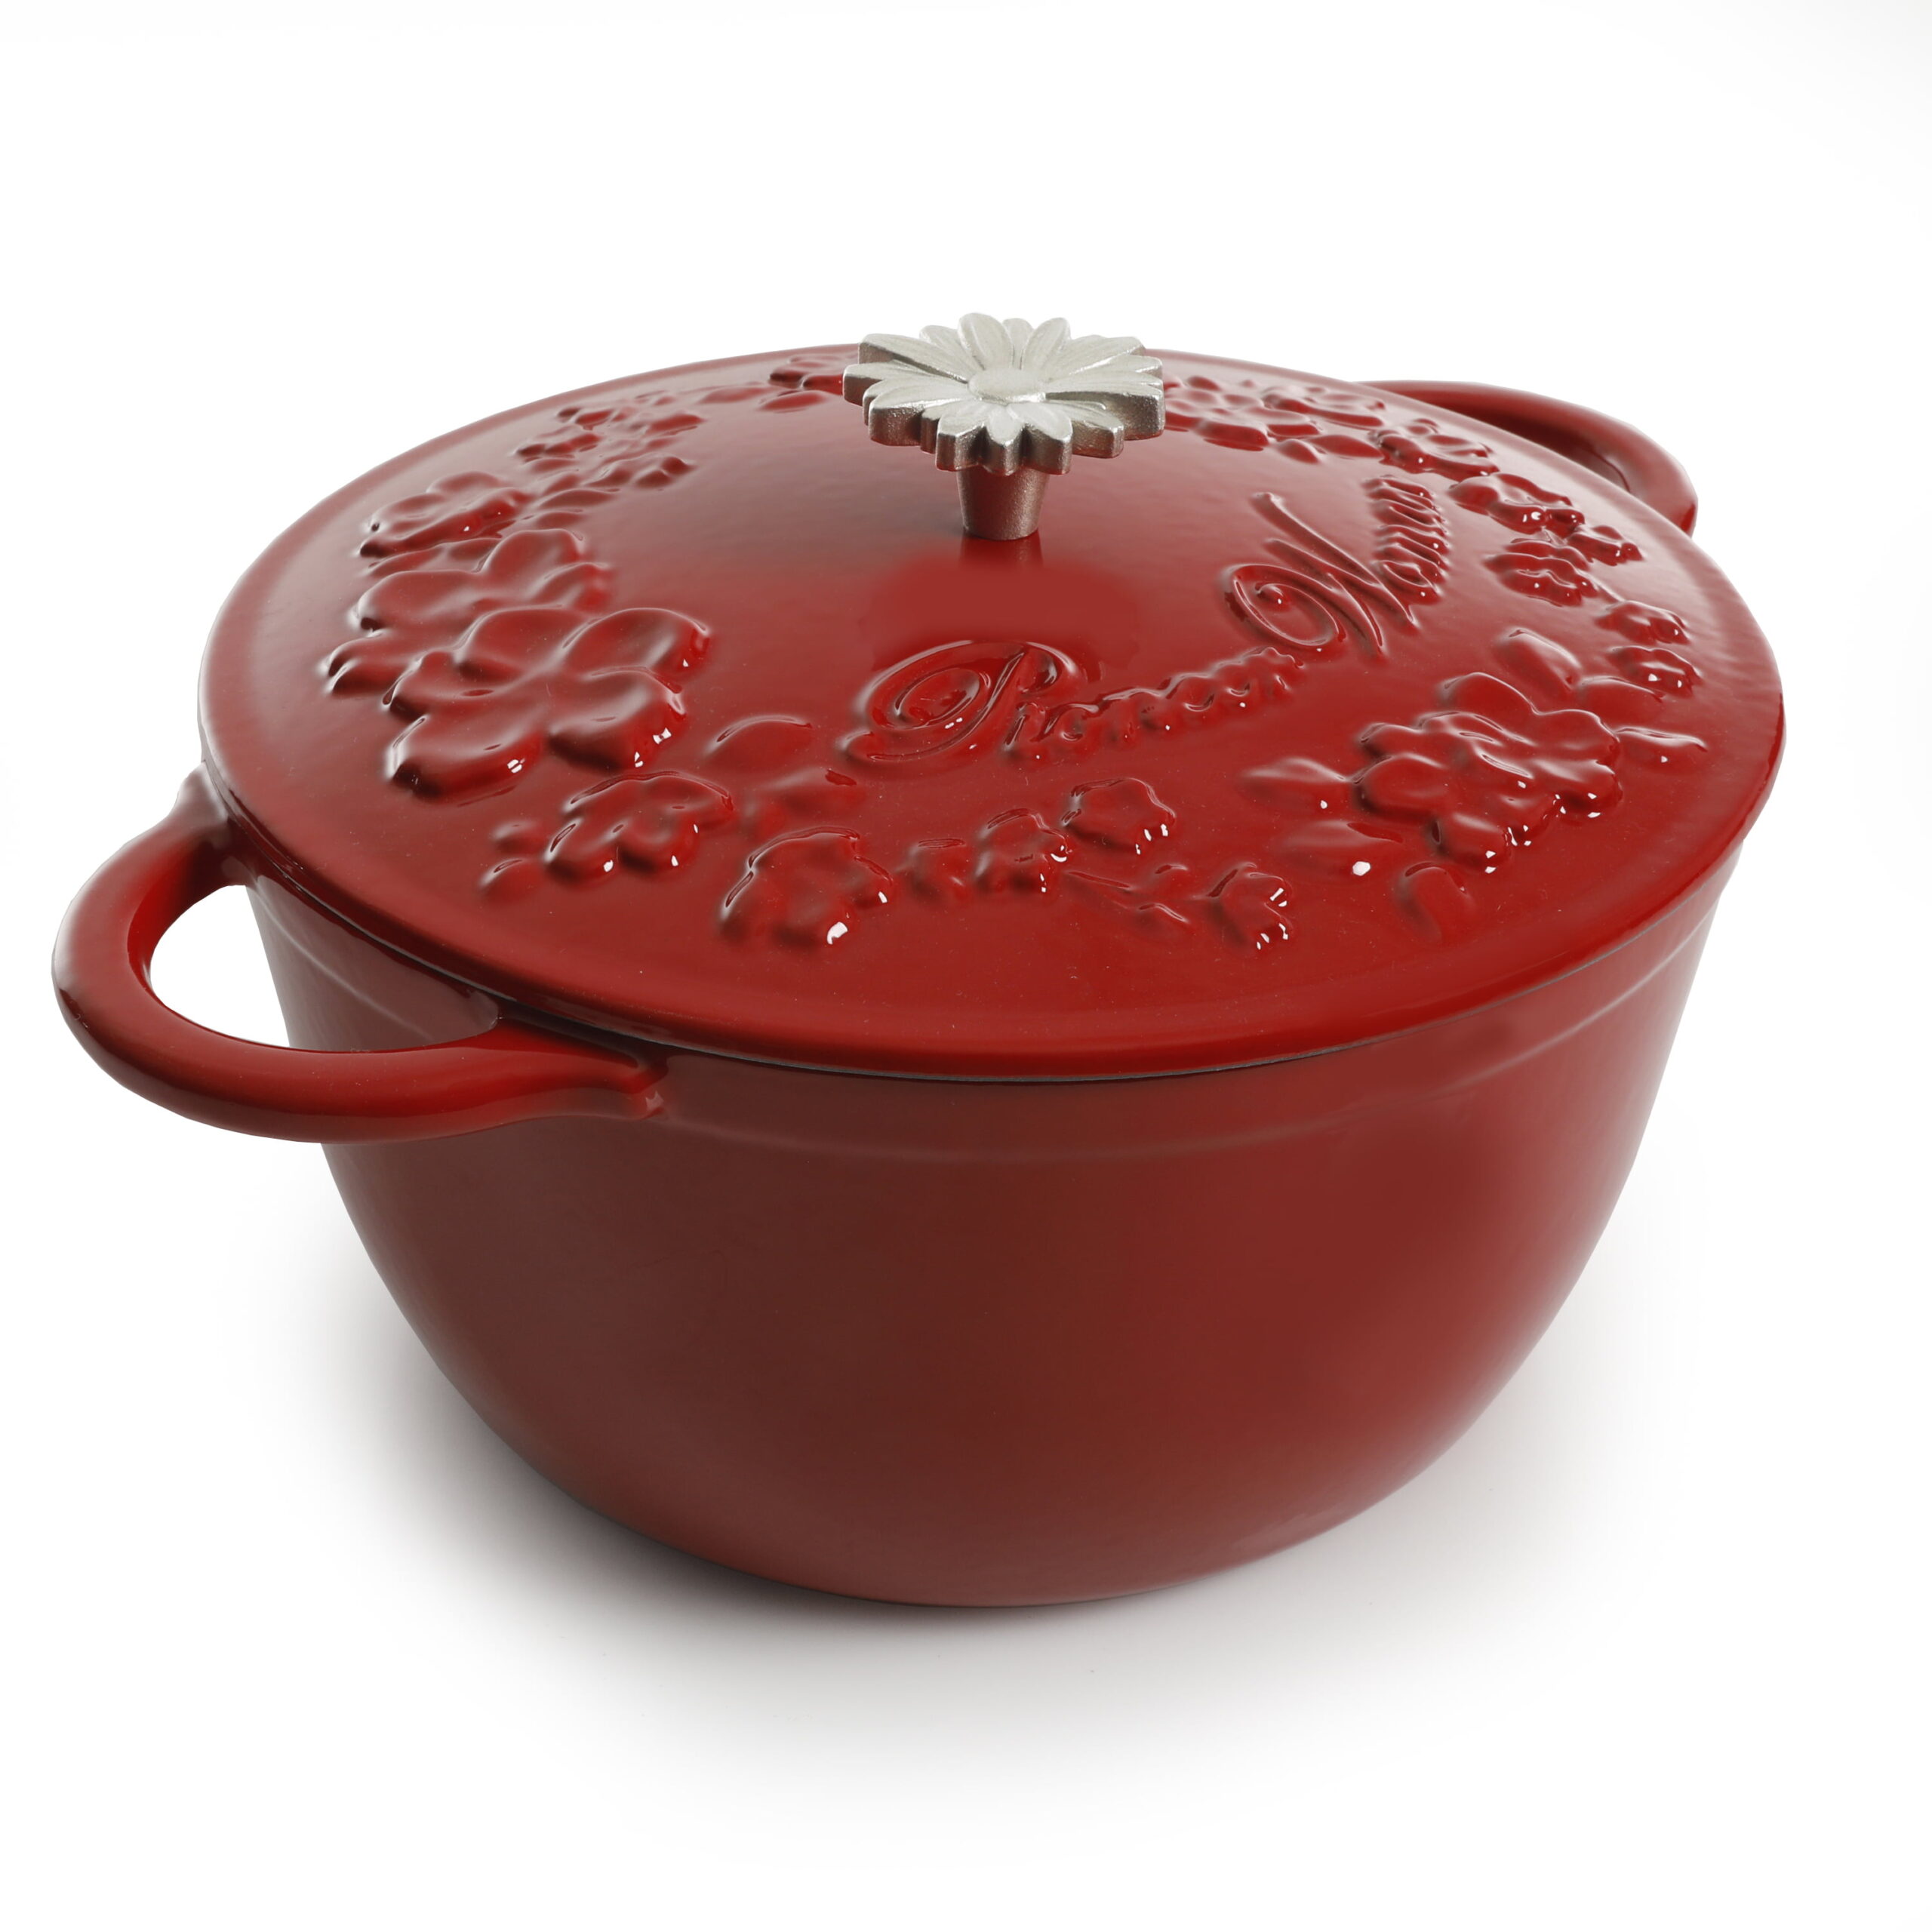 Timeless Beauty 7-Quart Dutch Oven with Bakelite Knob and